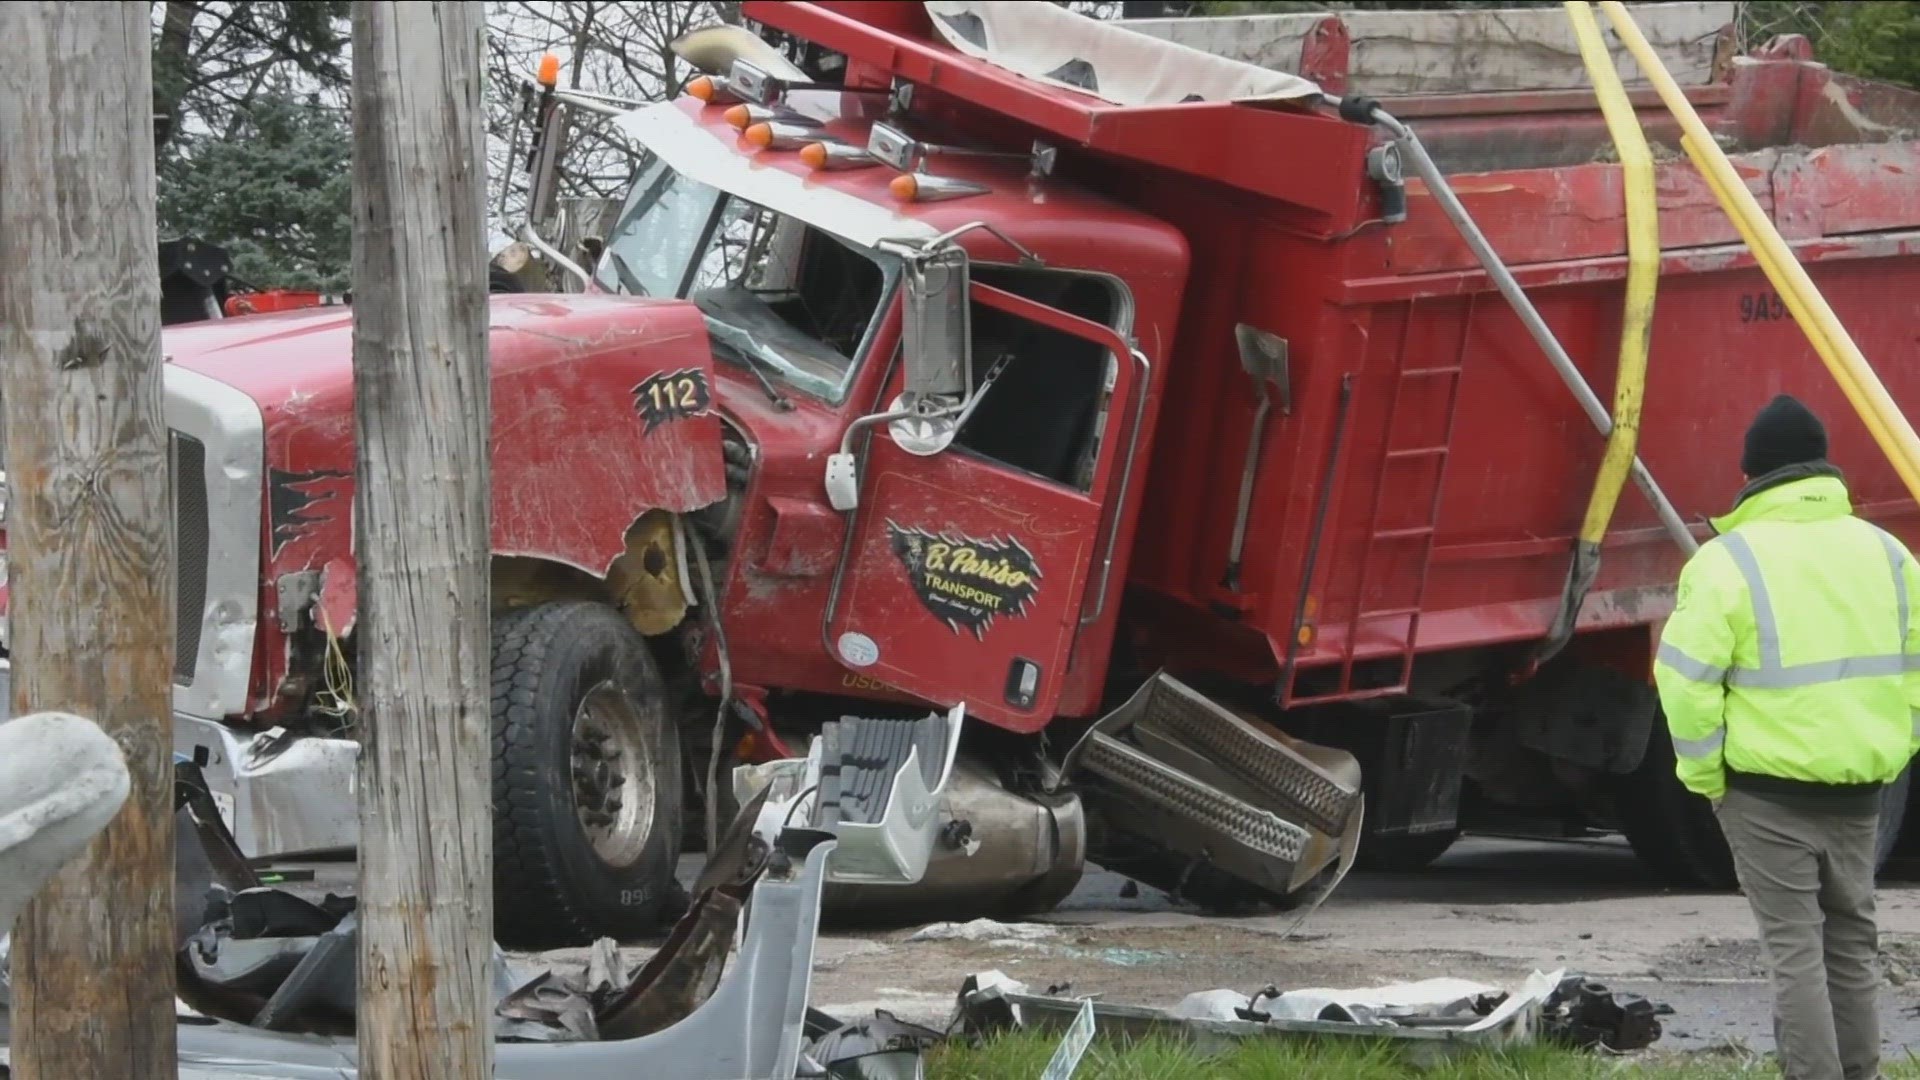 The dump truck driver was extricated, then taken to a hospital to be treated for injuries.